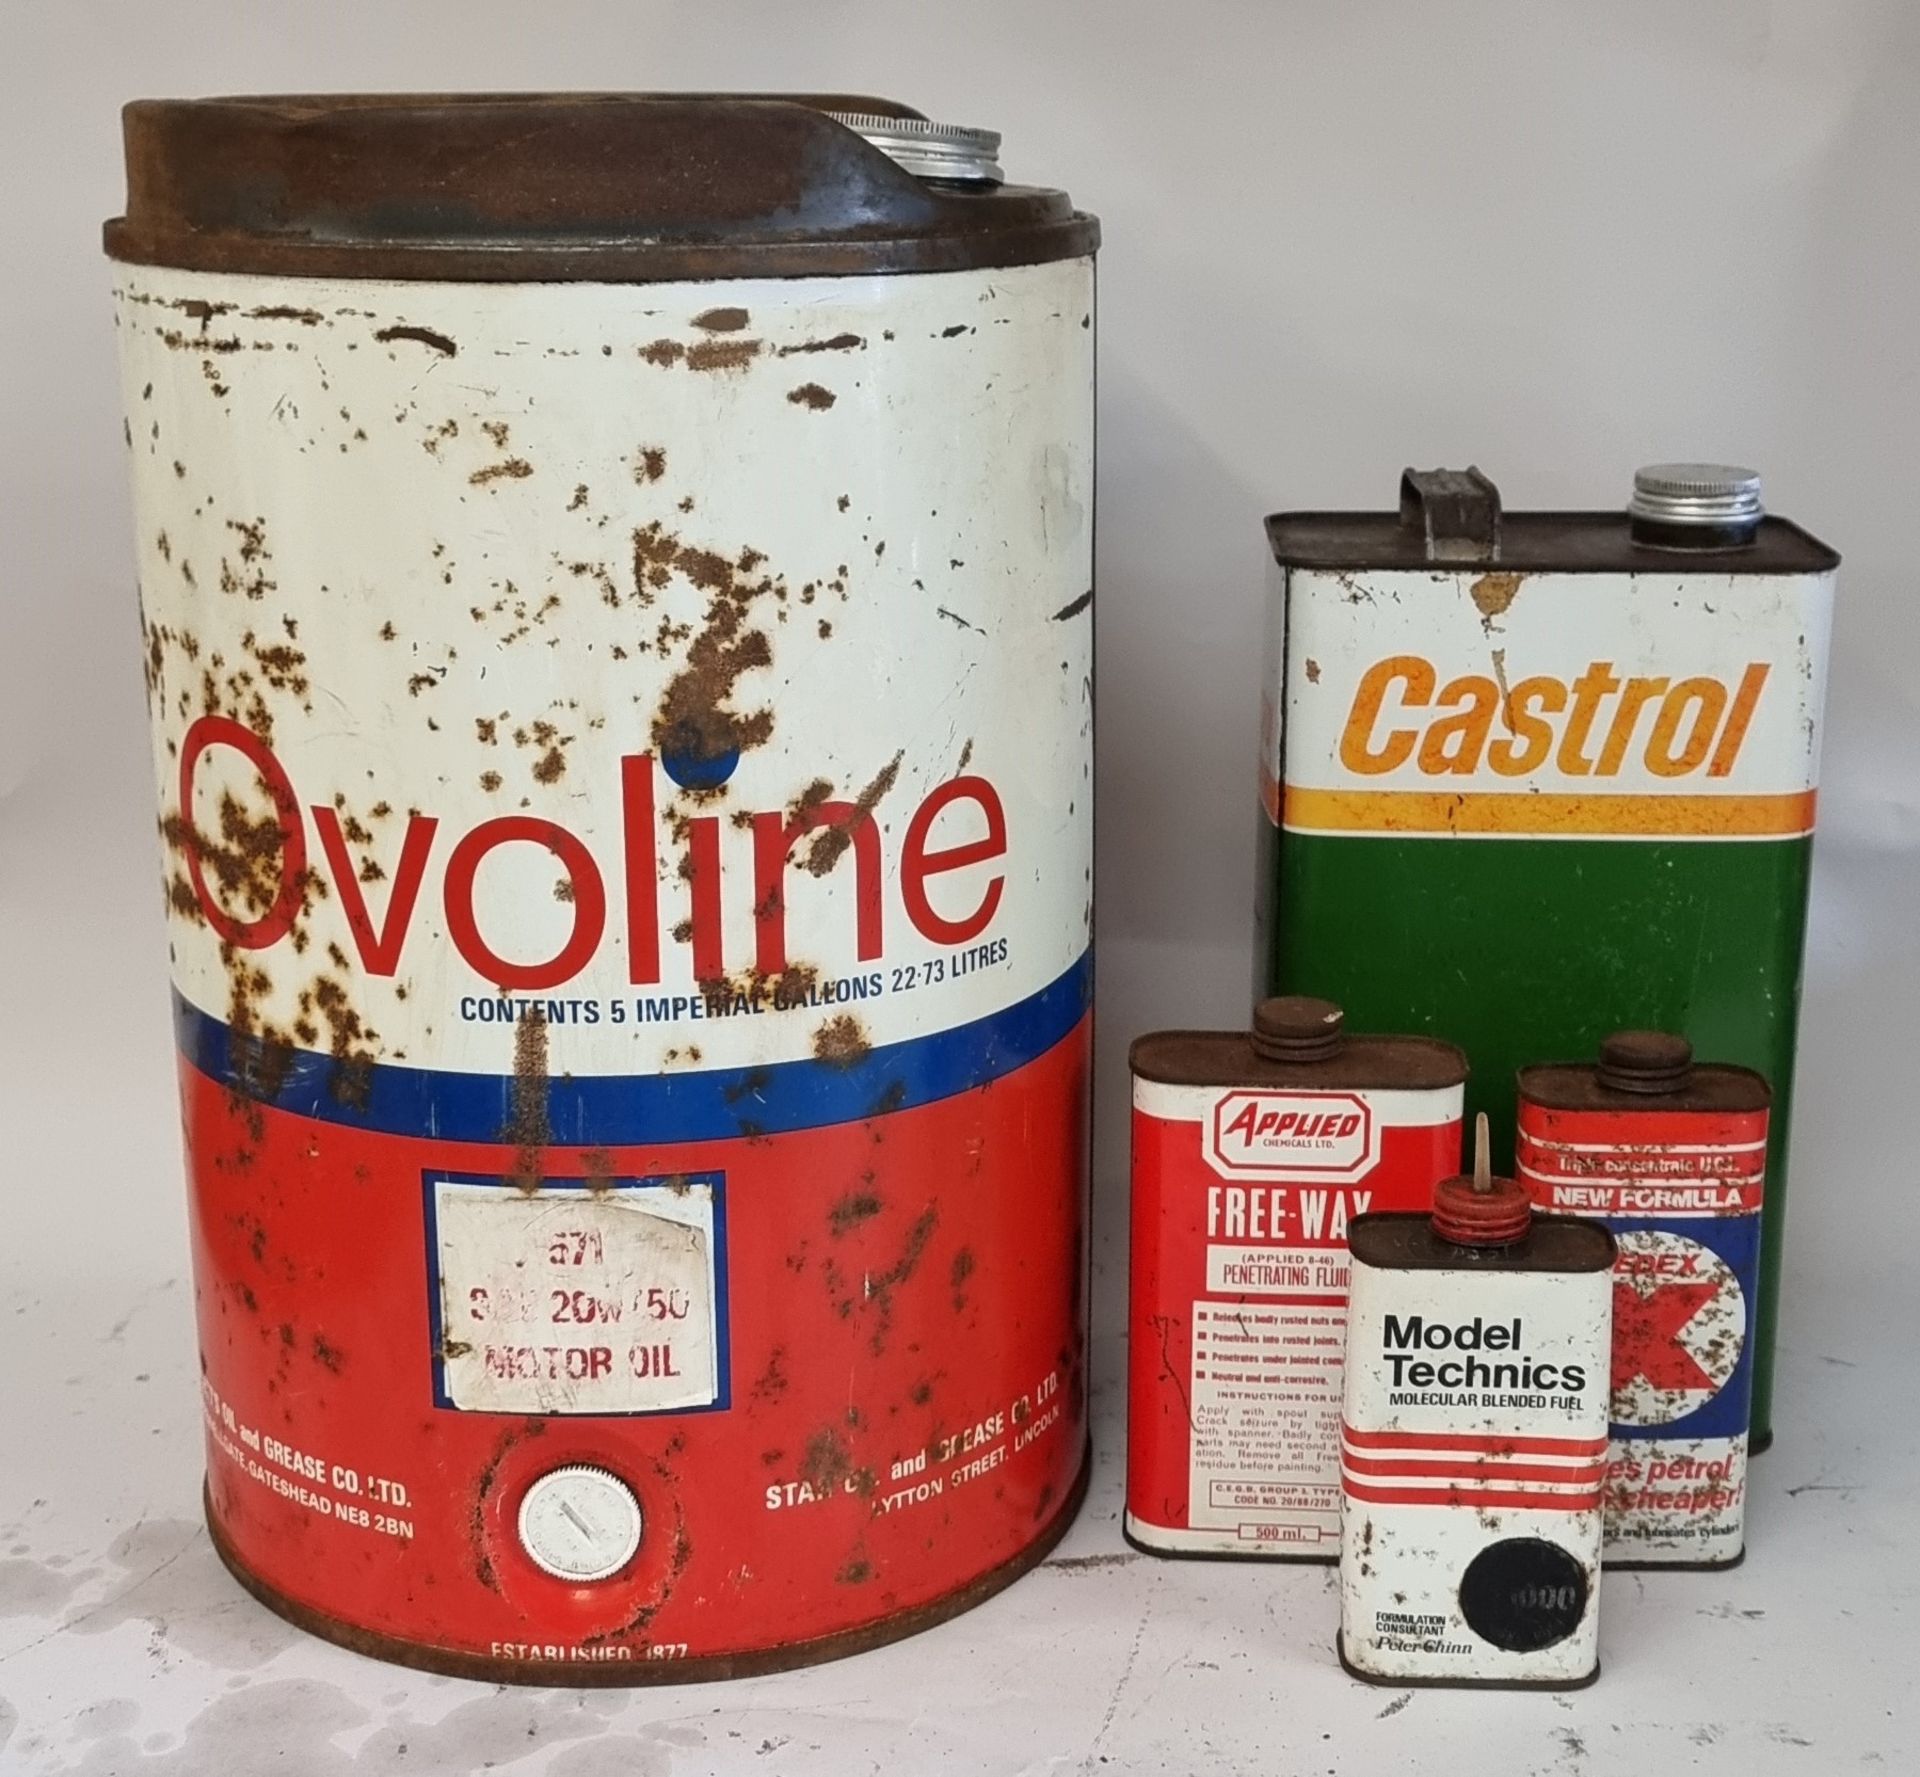 An Ovoline 5 gallon can, Castrol 1 gallon can and three other cans